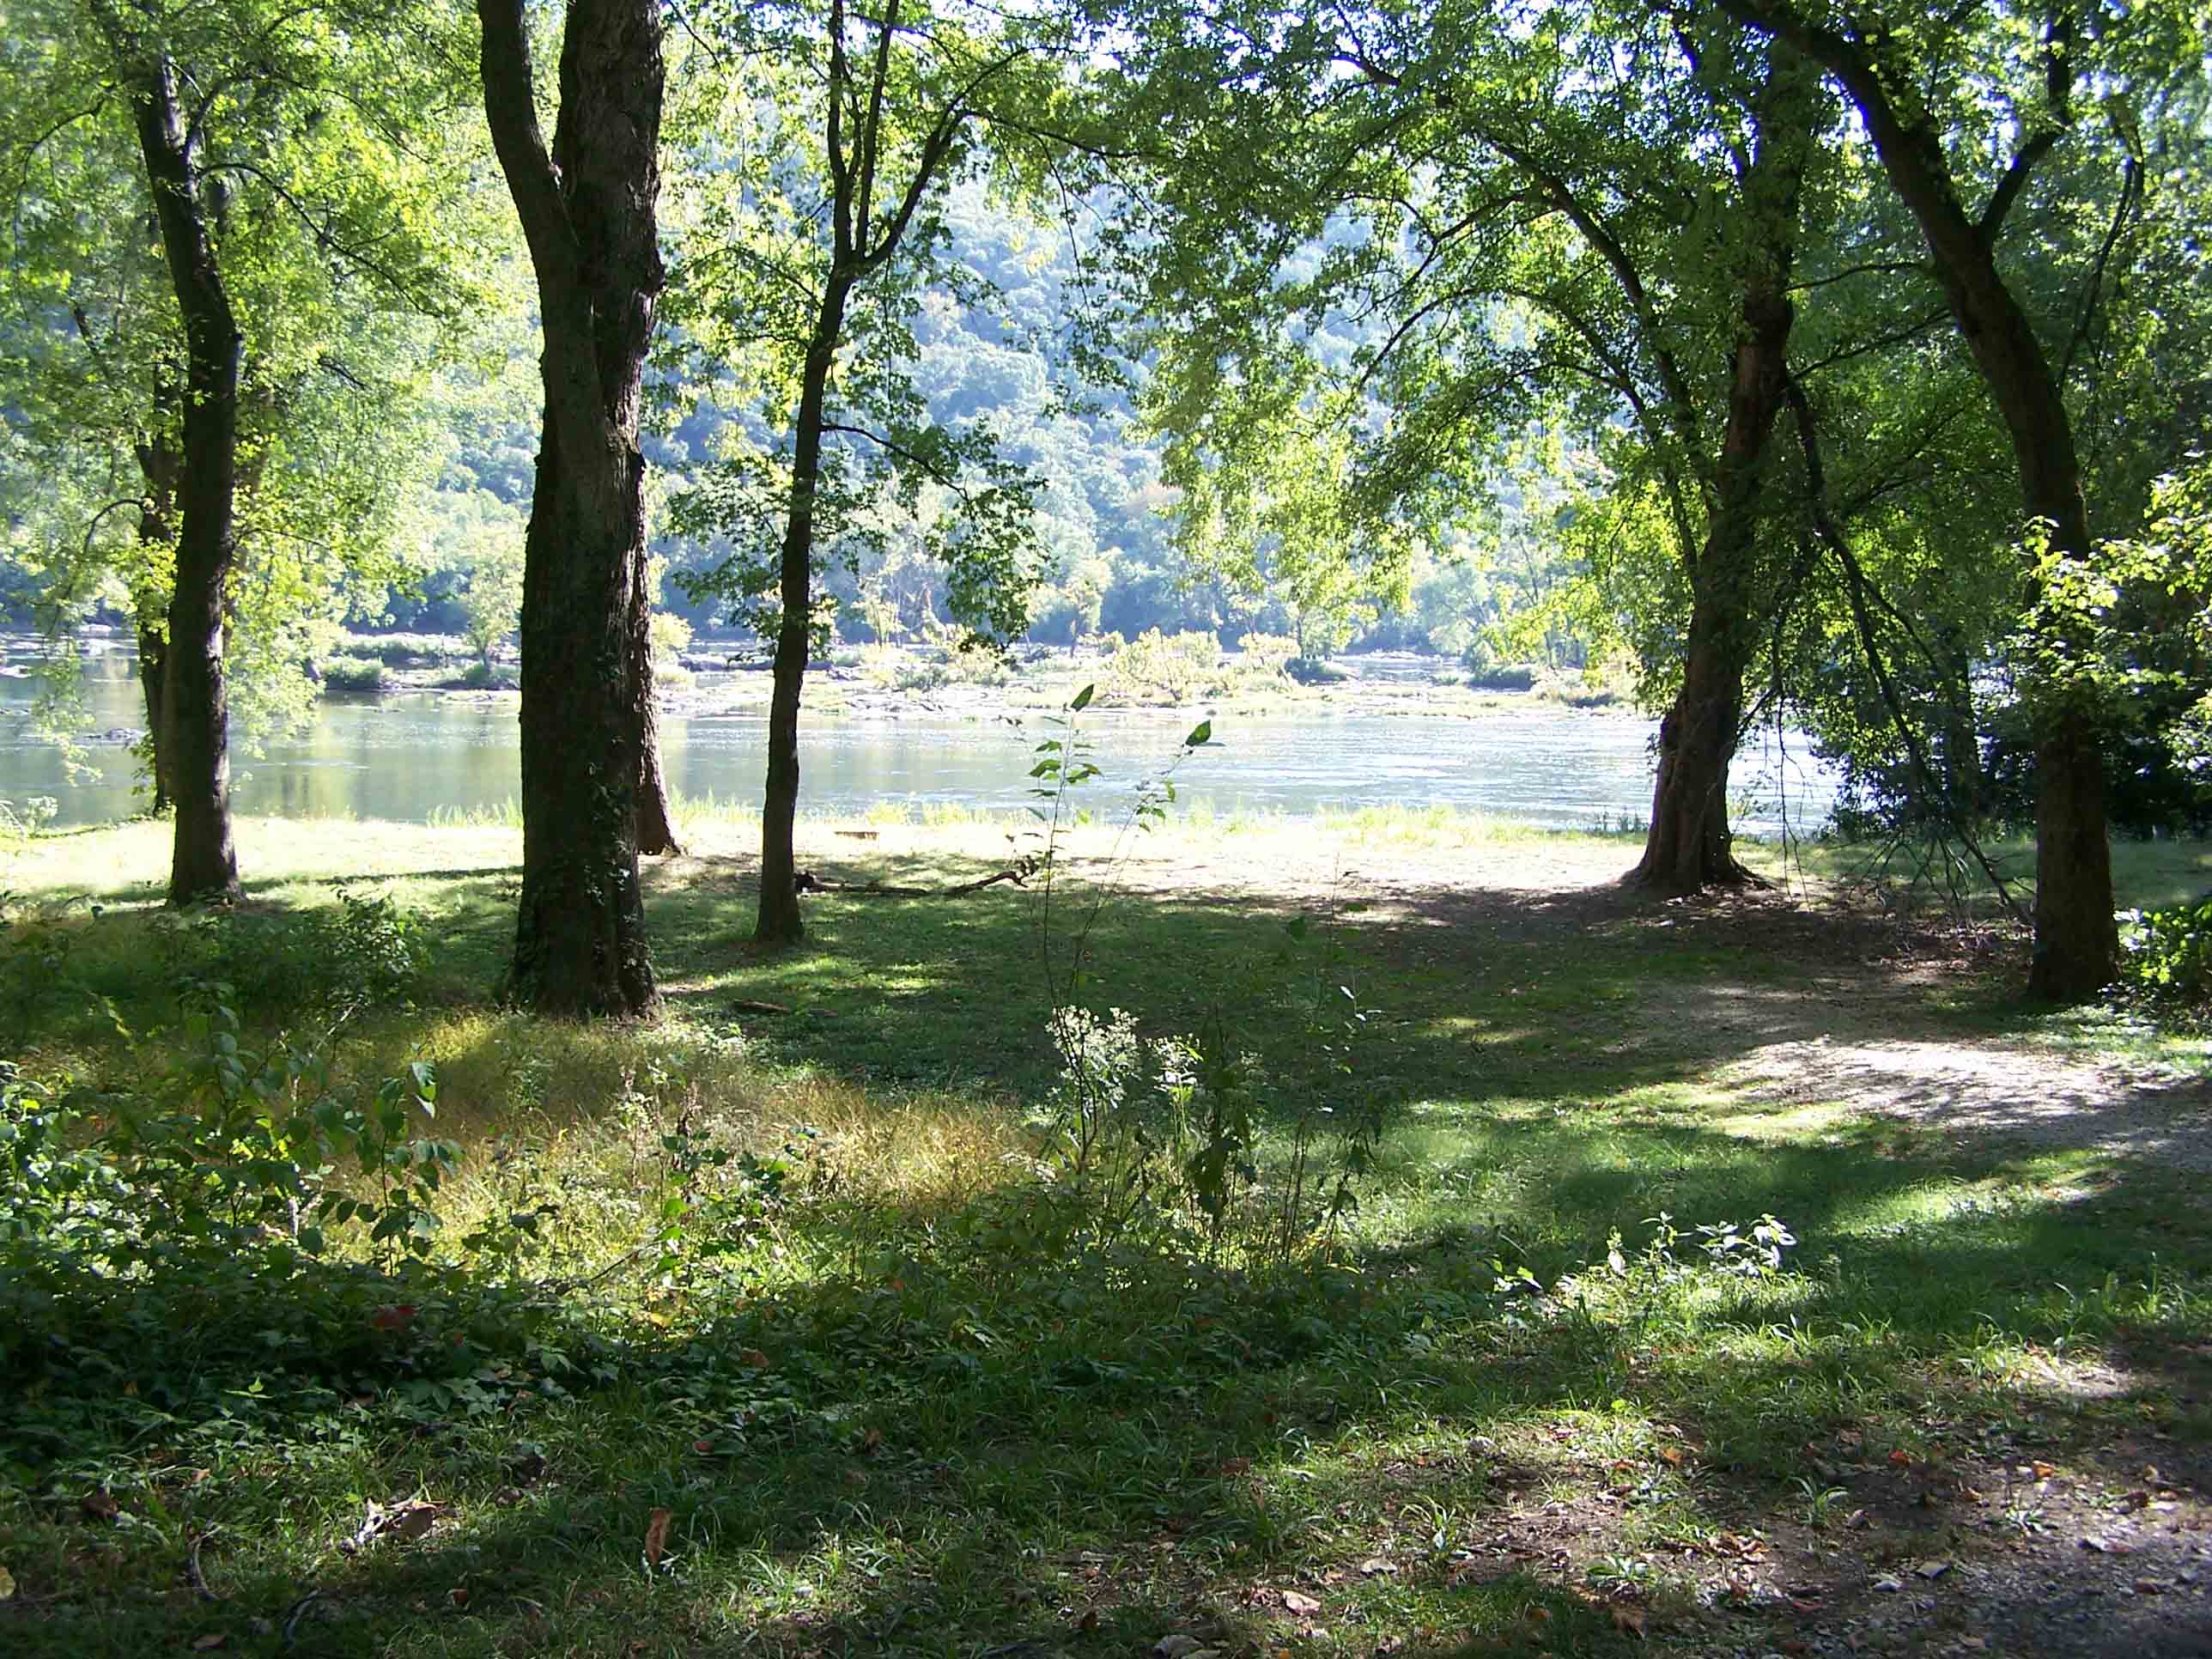 Grassy area along the Potomac River that can NOT be used for a campground. There is NO camping in this section. The river is polluted. Courtesy at@rohland.org